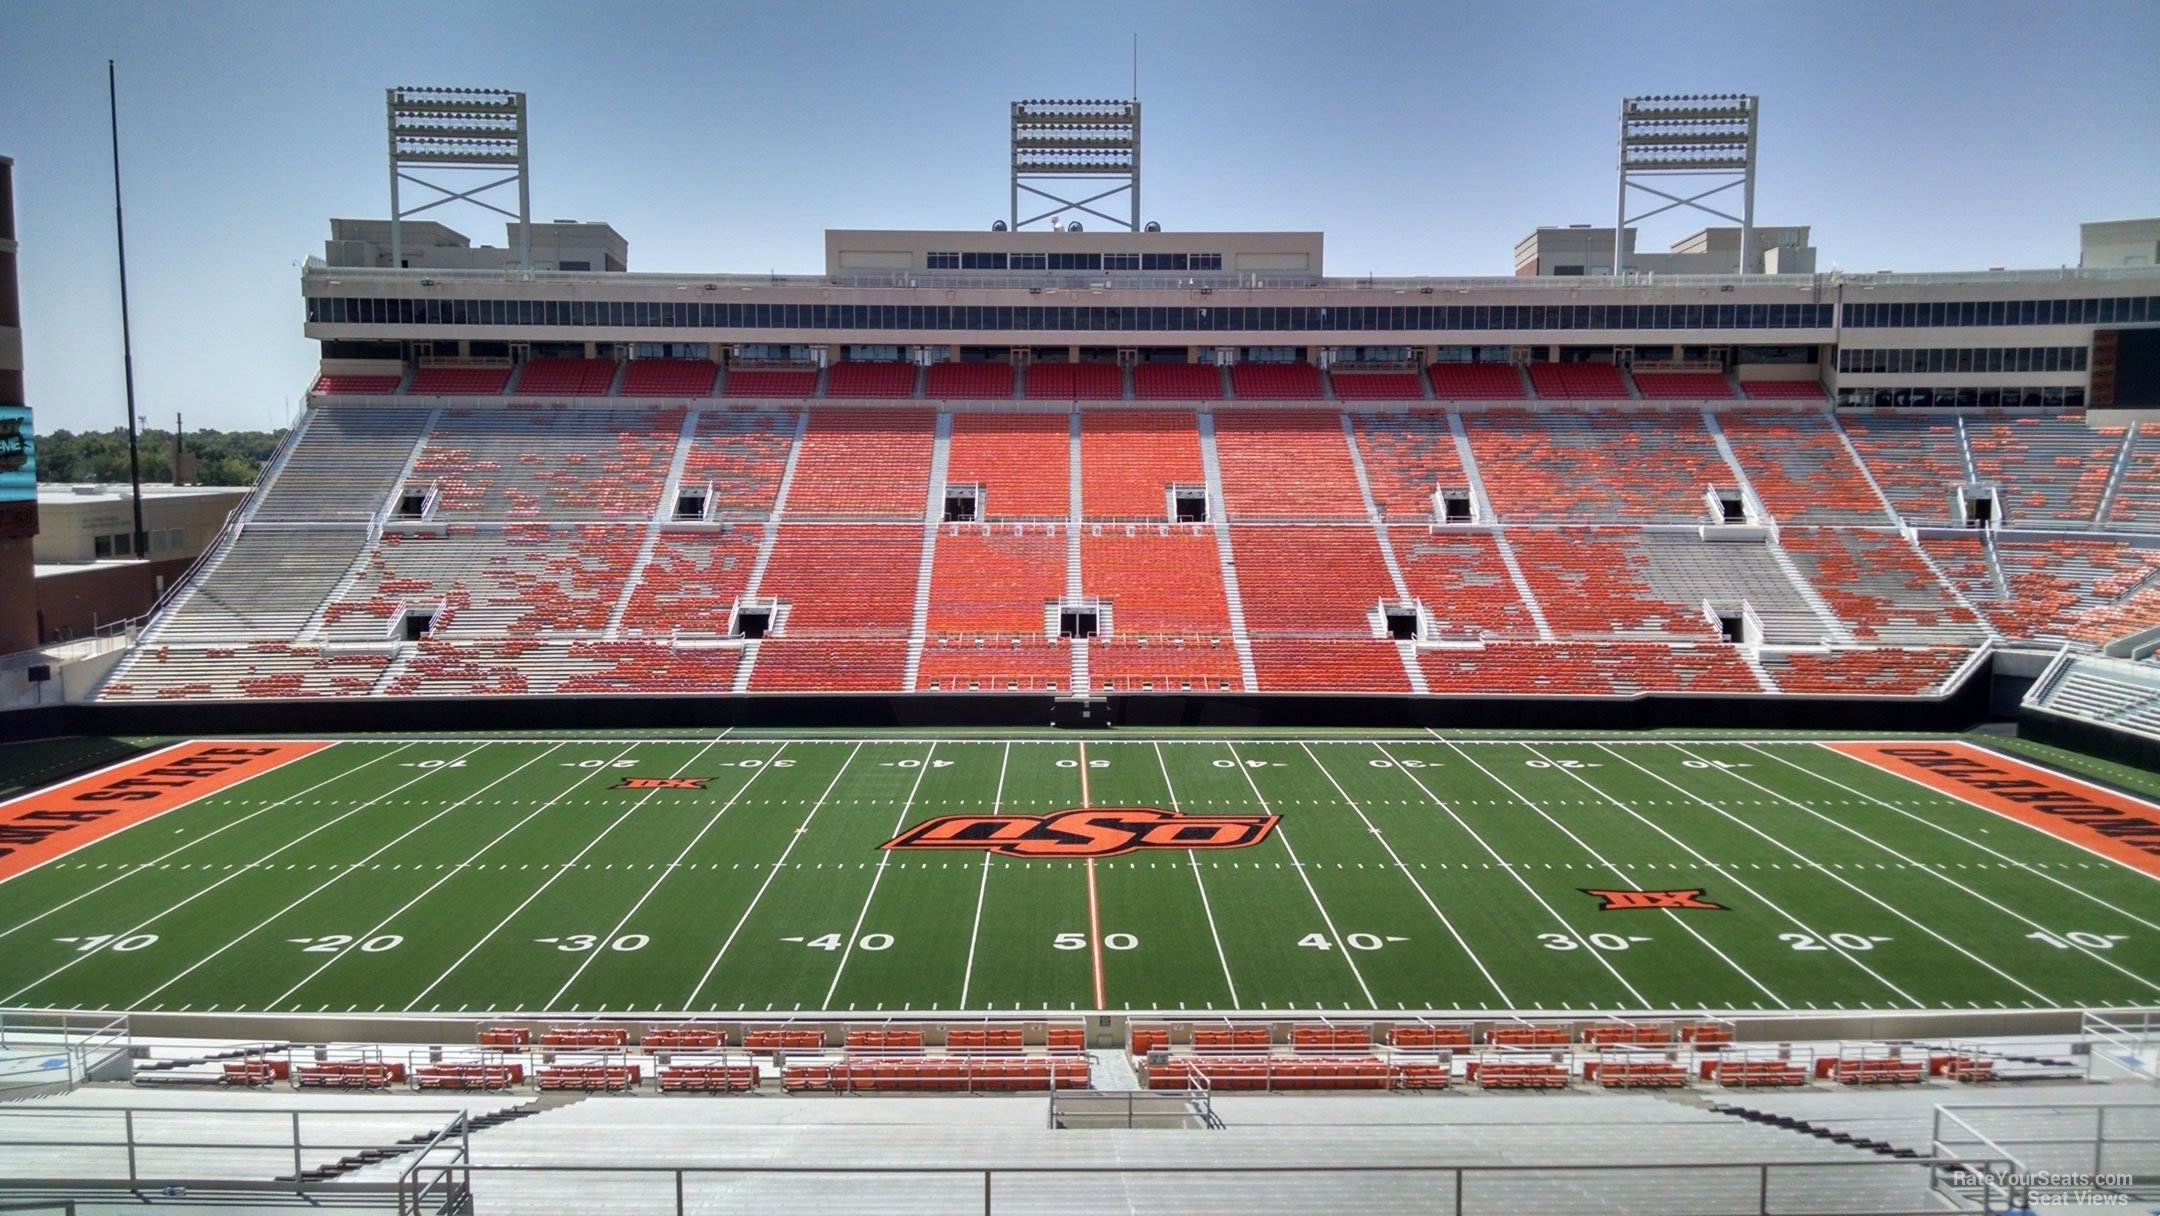 section 331a, row 19 seat view  - boone pickens stadium